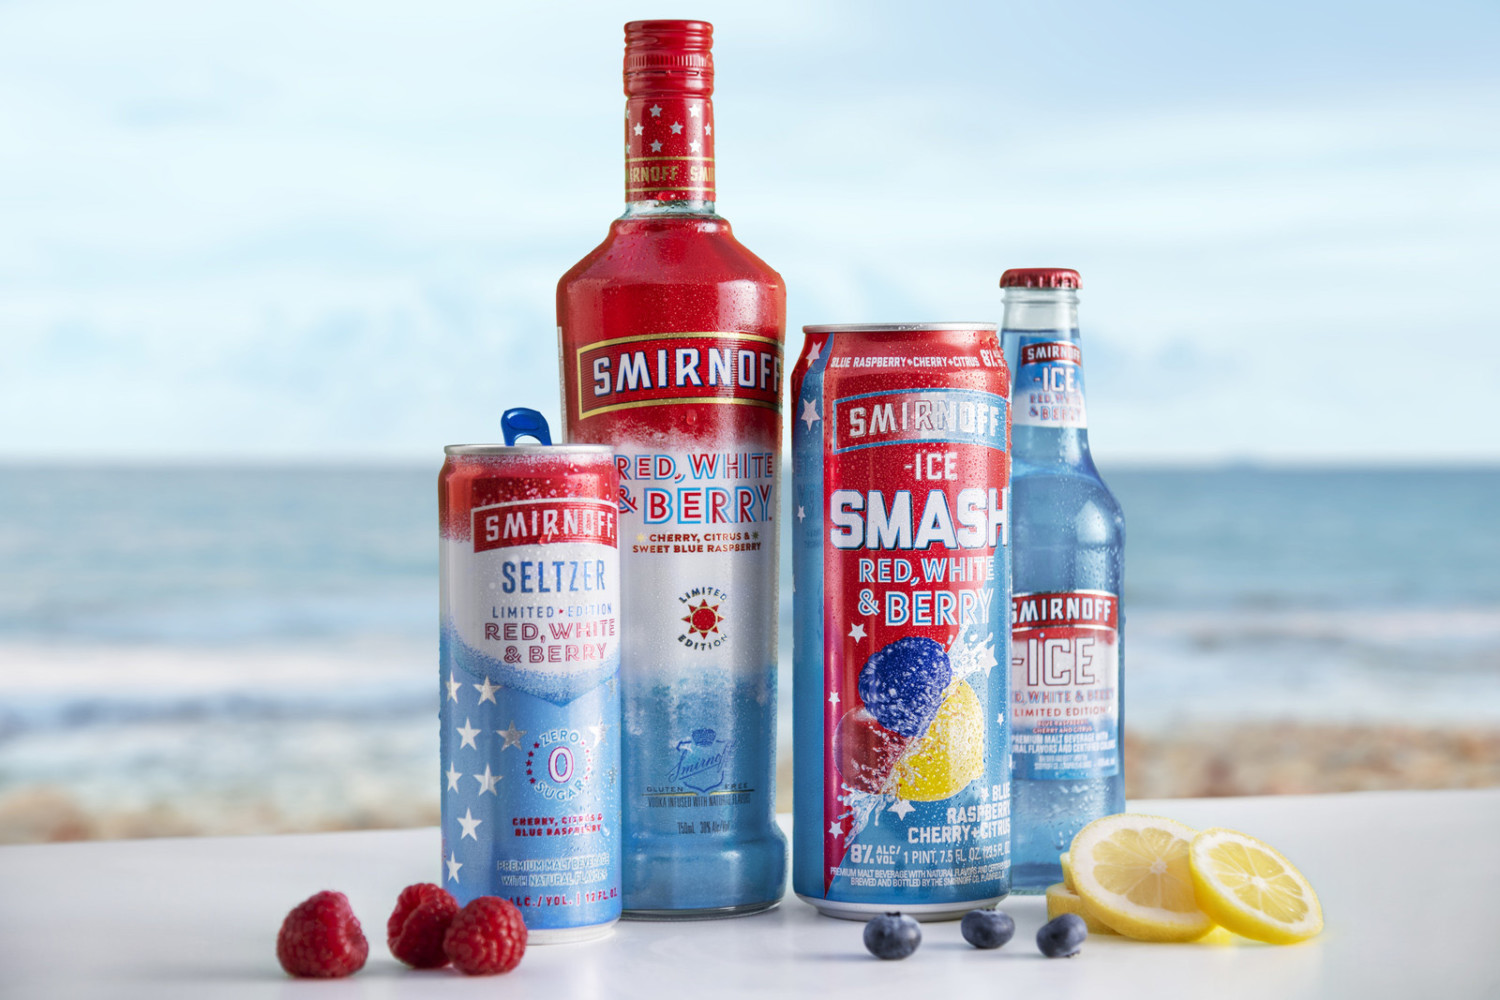 A beach scene with the four kinds of Smirnoff Red, White & Berry flavored beverages: canned seltzer, bottle of vodka, smash flavor can, and bottled ice flavor 